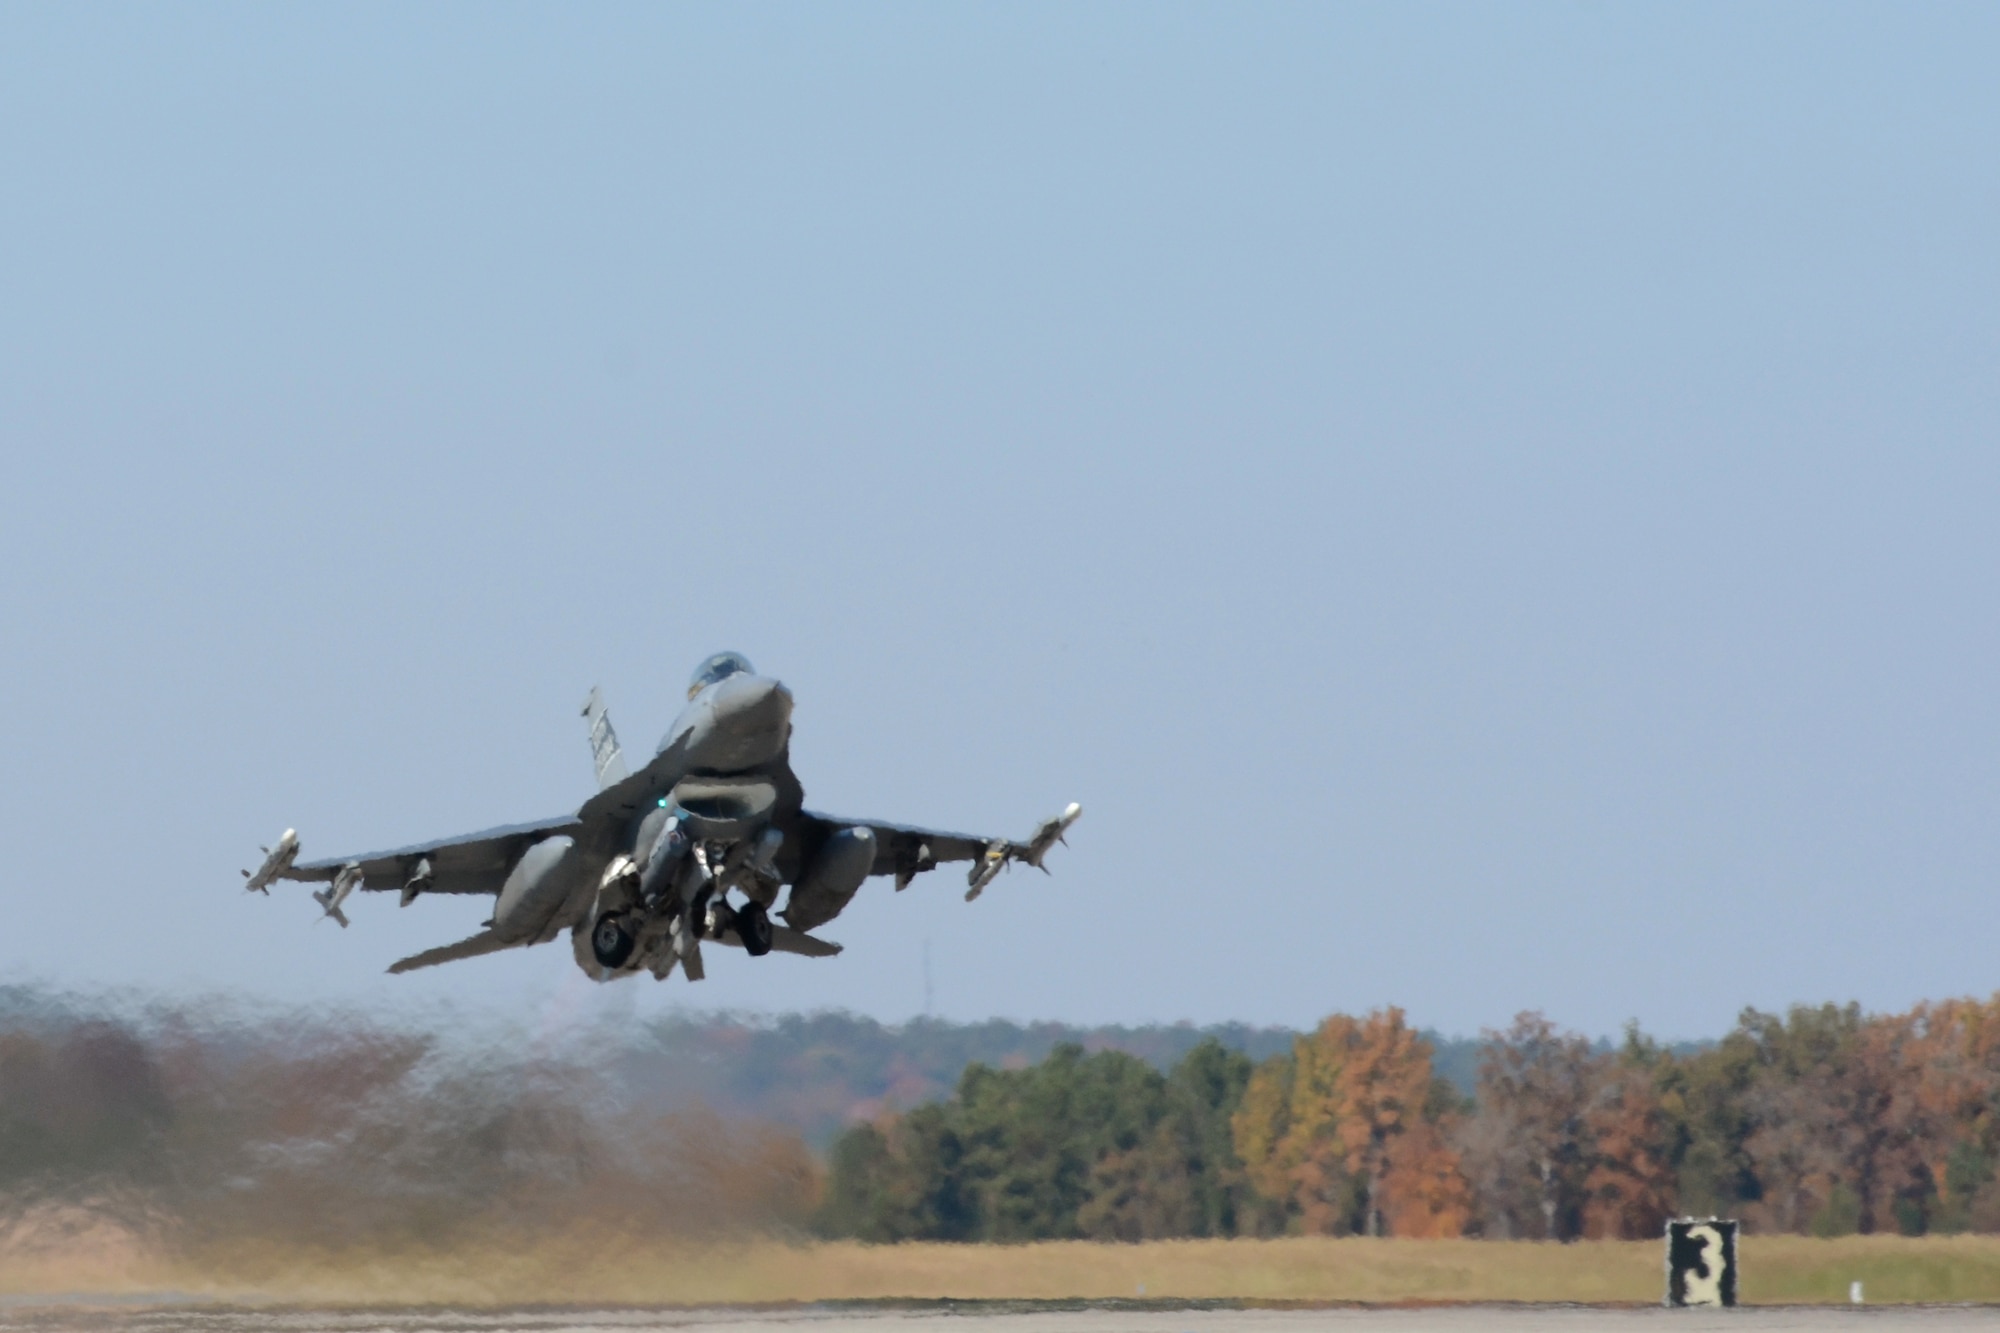 An F-16 from the South Carolina Air National Guard’s 169th Fighter Wing takes off from McEntire Joint National Guard Base as a part of the joint Army and Air National Guard exercise called Carolina Thunder. South Carolina National Guard, along with North Carolina and Georgia National Guard units conducted “Carolina Thunder 14”,  a drill weekend, joint training exercise Nov. 15, 2014. More than 30 aircraft participated in the mass take-off from McEntire Joint National Guard Base, Eastover, S.C. Units conducted air and ground operations at the Savannah River Site in Allendale, S.C. The S.C. Air National Guard 169th Fighter Wing’s F-16 Fighting Falcons joined AH-64D Apaches, CH-47 Chinooks, UH-60 Black Hawks and more than 100 Infantry Soldiers from the S.C. Army National Guard to train with Apaches from the N.C. Army National Guard and the Joint Surveillance Target Attack Radar System (JSATRS) and Joint Terminal Training Center (JTAC) from the Georgia Air National Guard in a collective force-on-force, enemy suppression and assault mission. (U.S. Air National Guard photo by Amn Megan Floyd/Released)